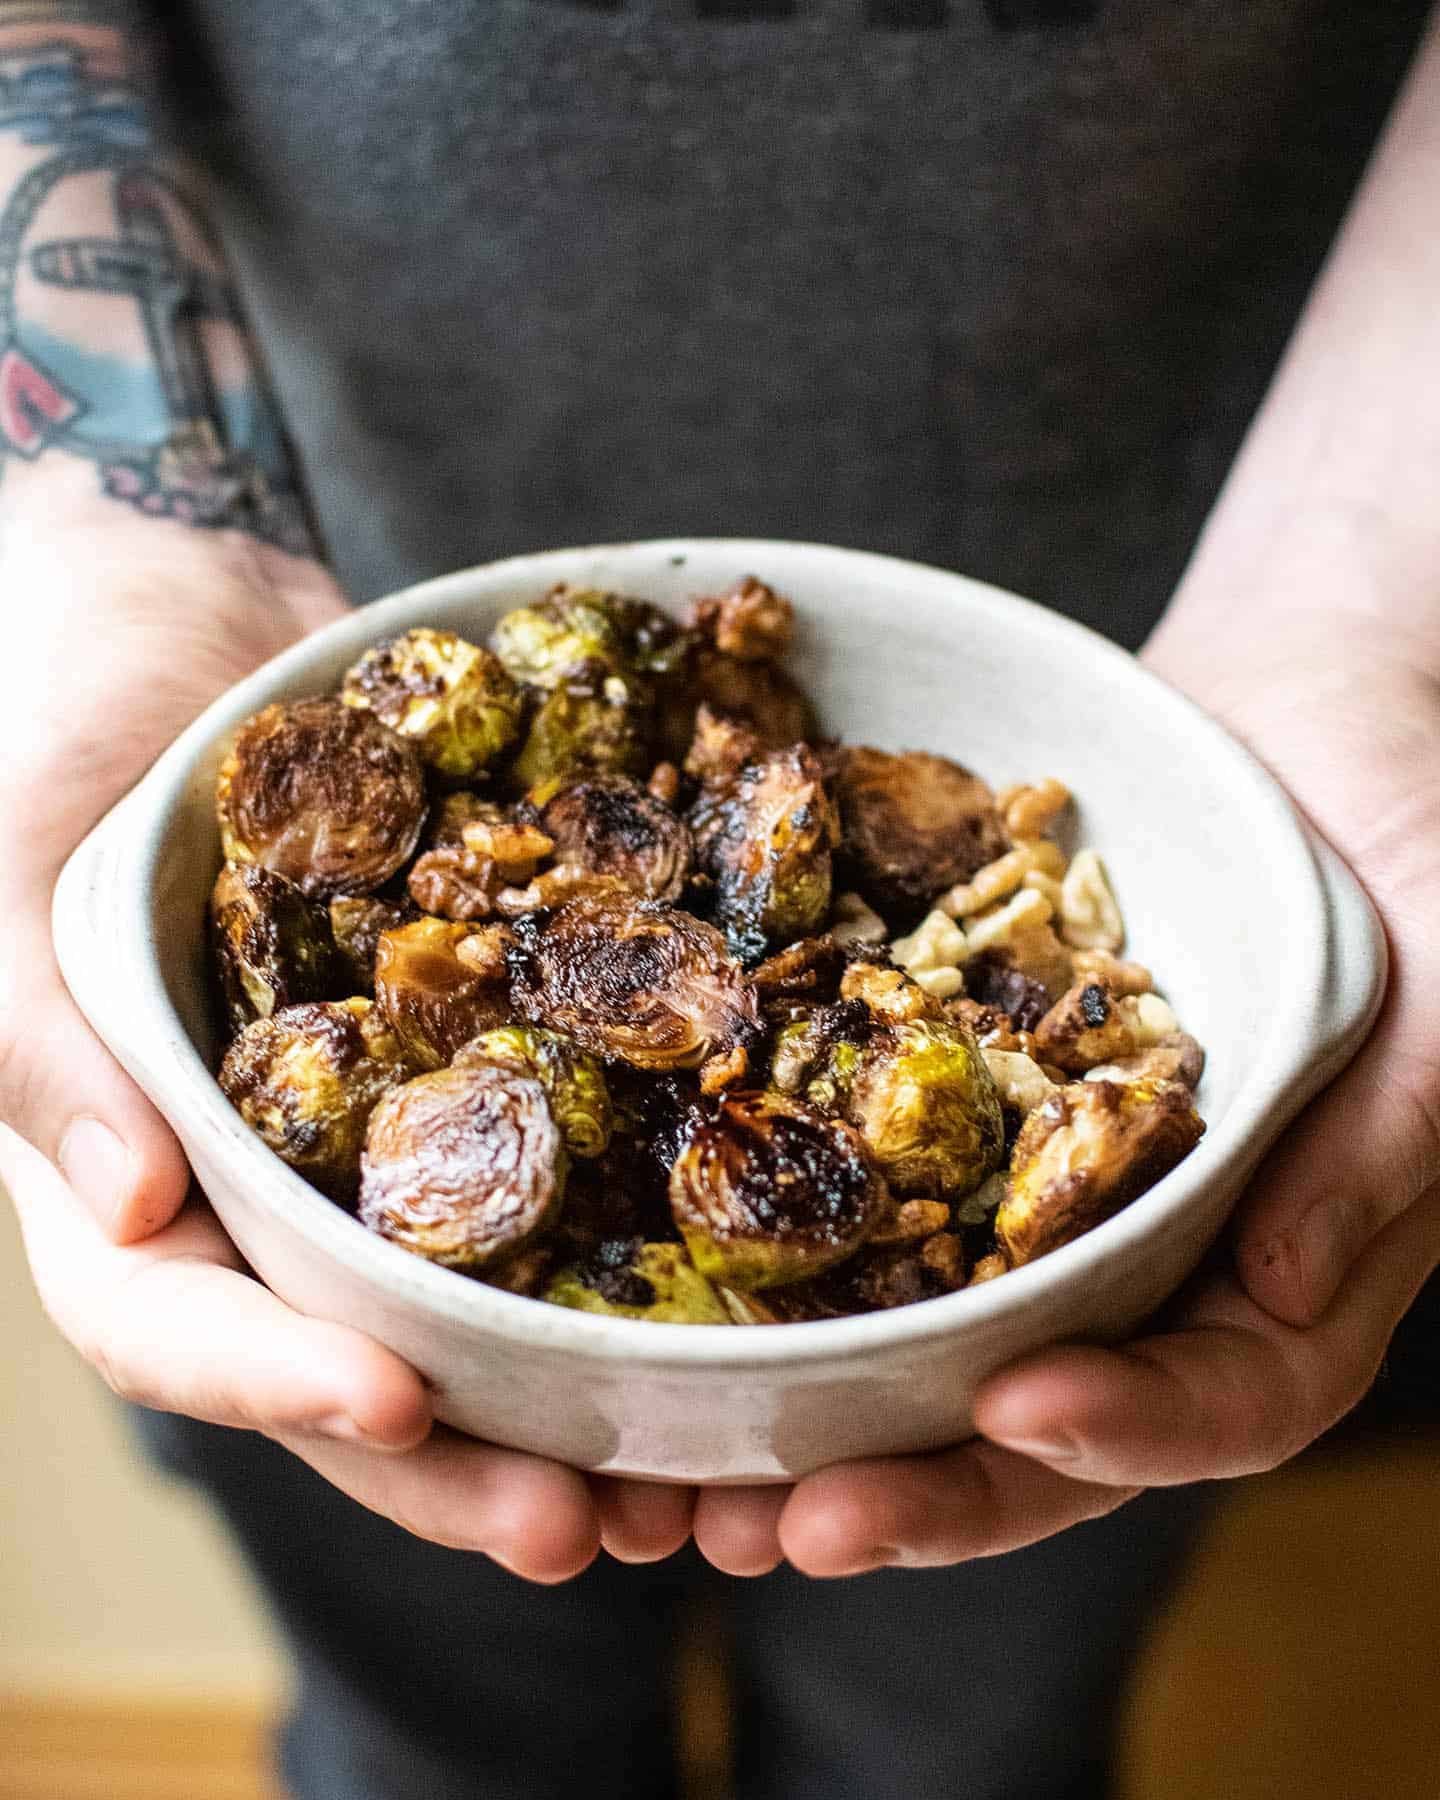 A small bowl filled with roasted sprouts being held in a pair of hands.